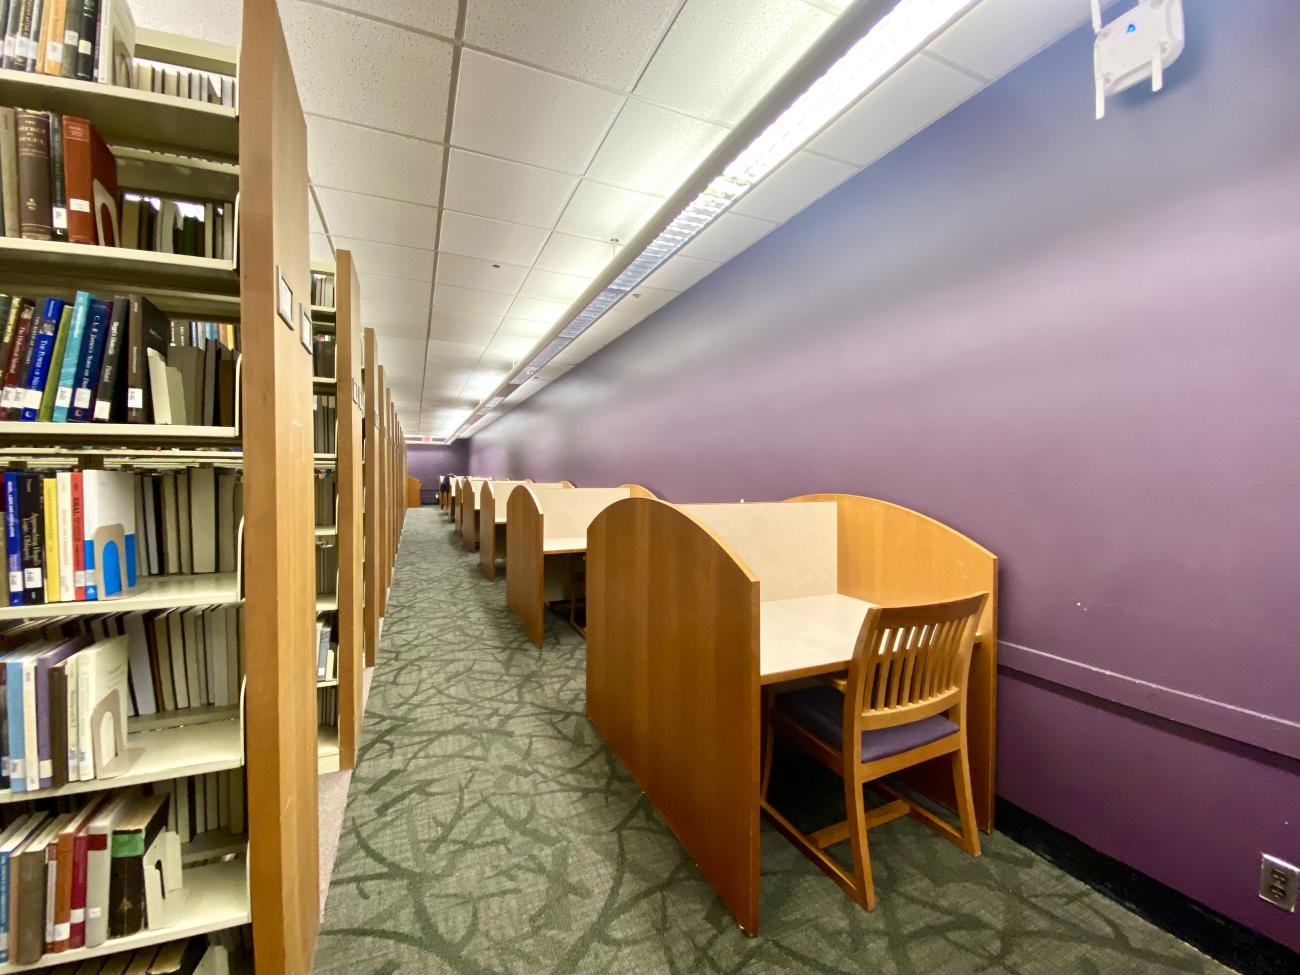 Study Carrels Along The Purple Wall on the 1st Level